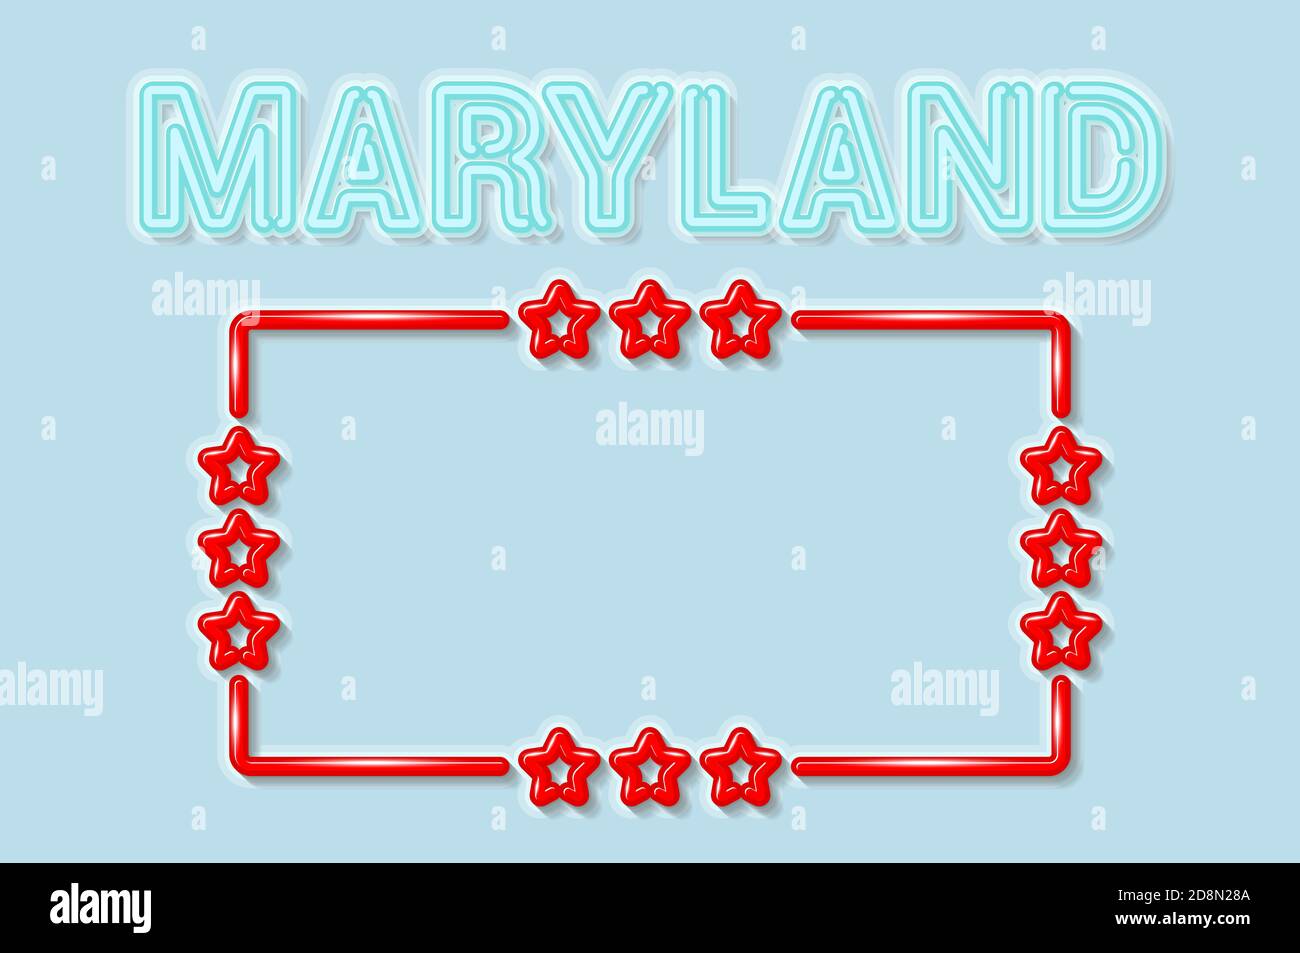 Maryland US state soft blue neon letters lights off. Glossy bold red frame with stars. Soft shadows. Light blue background. illustration. Stock Photo